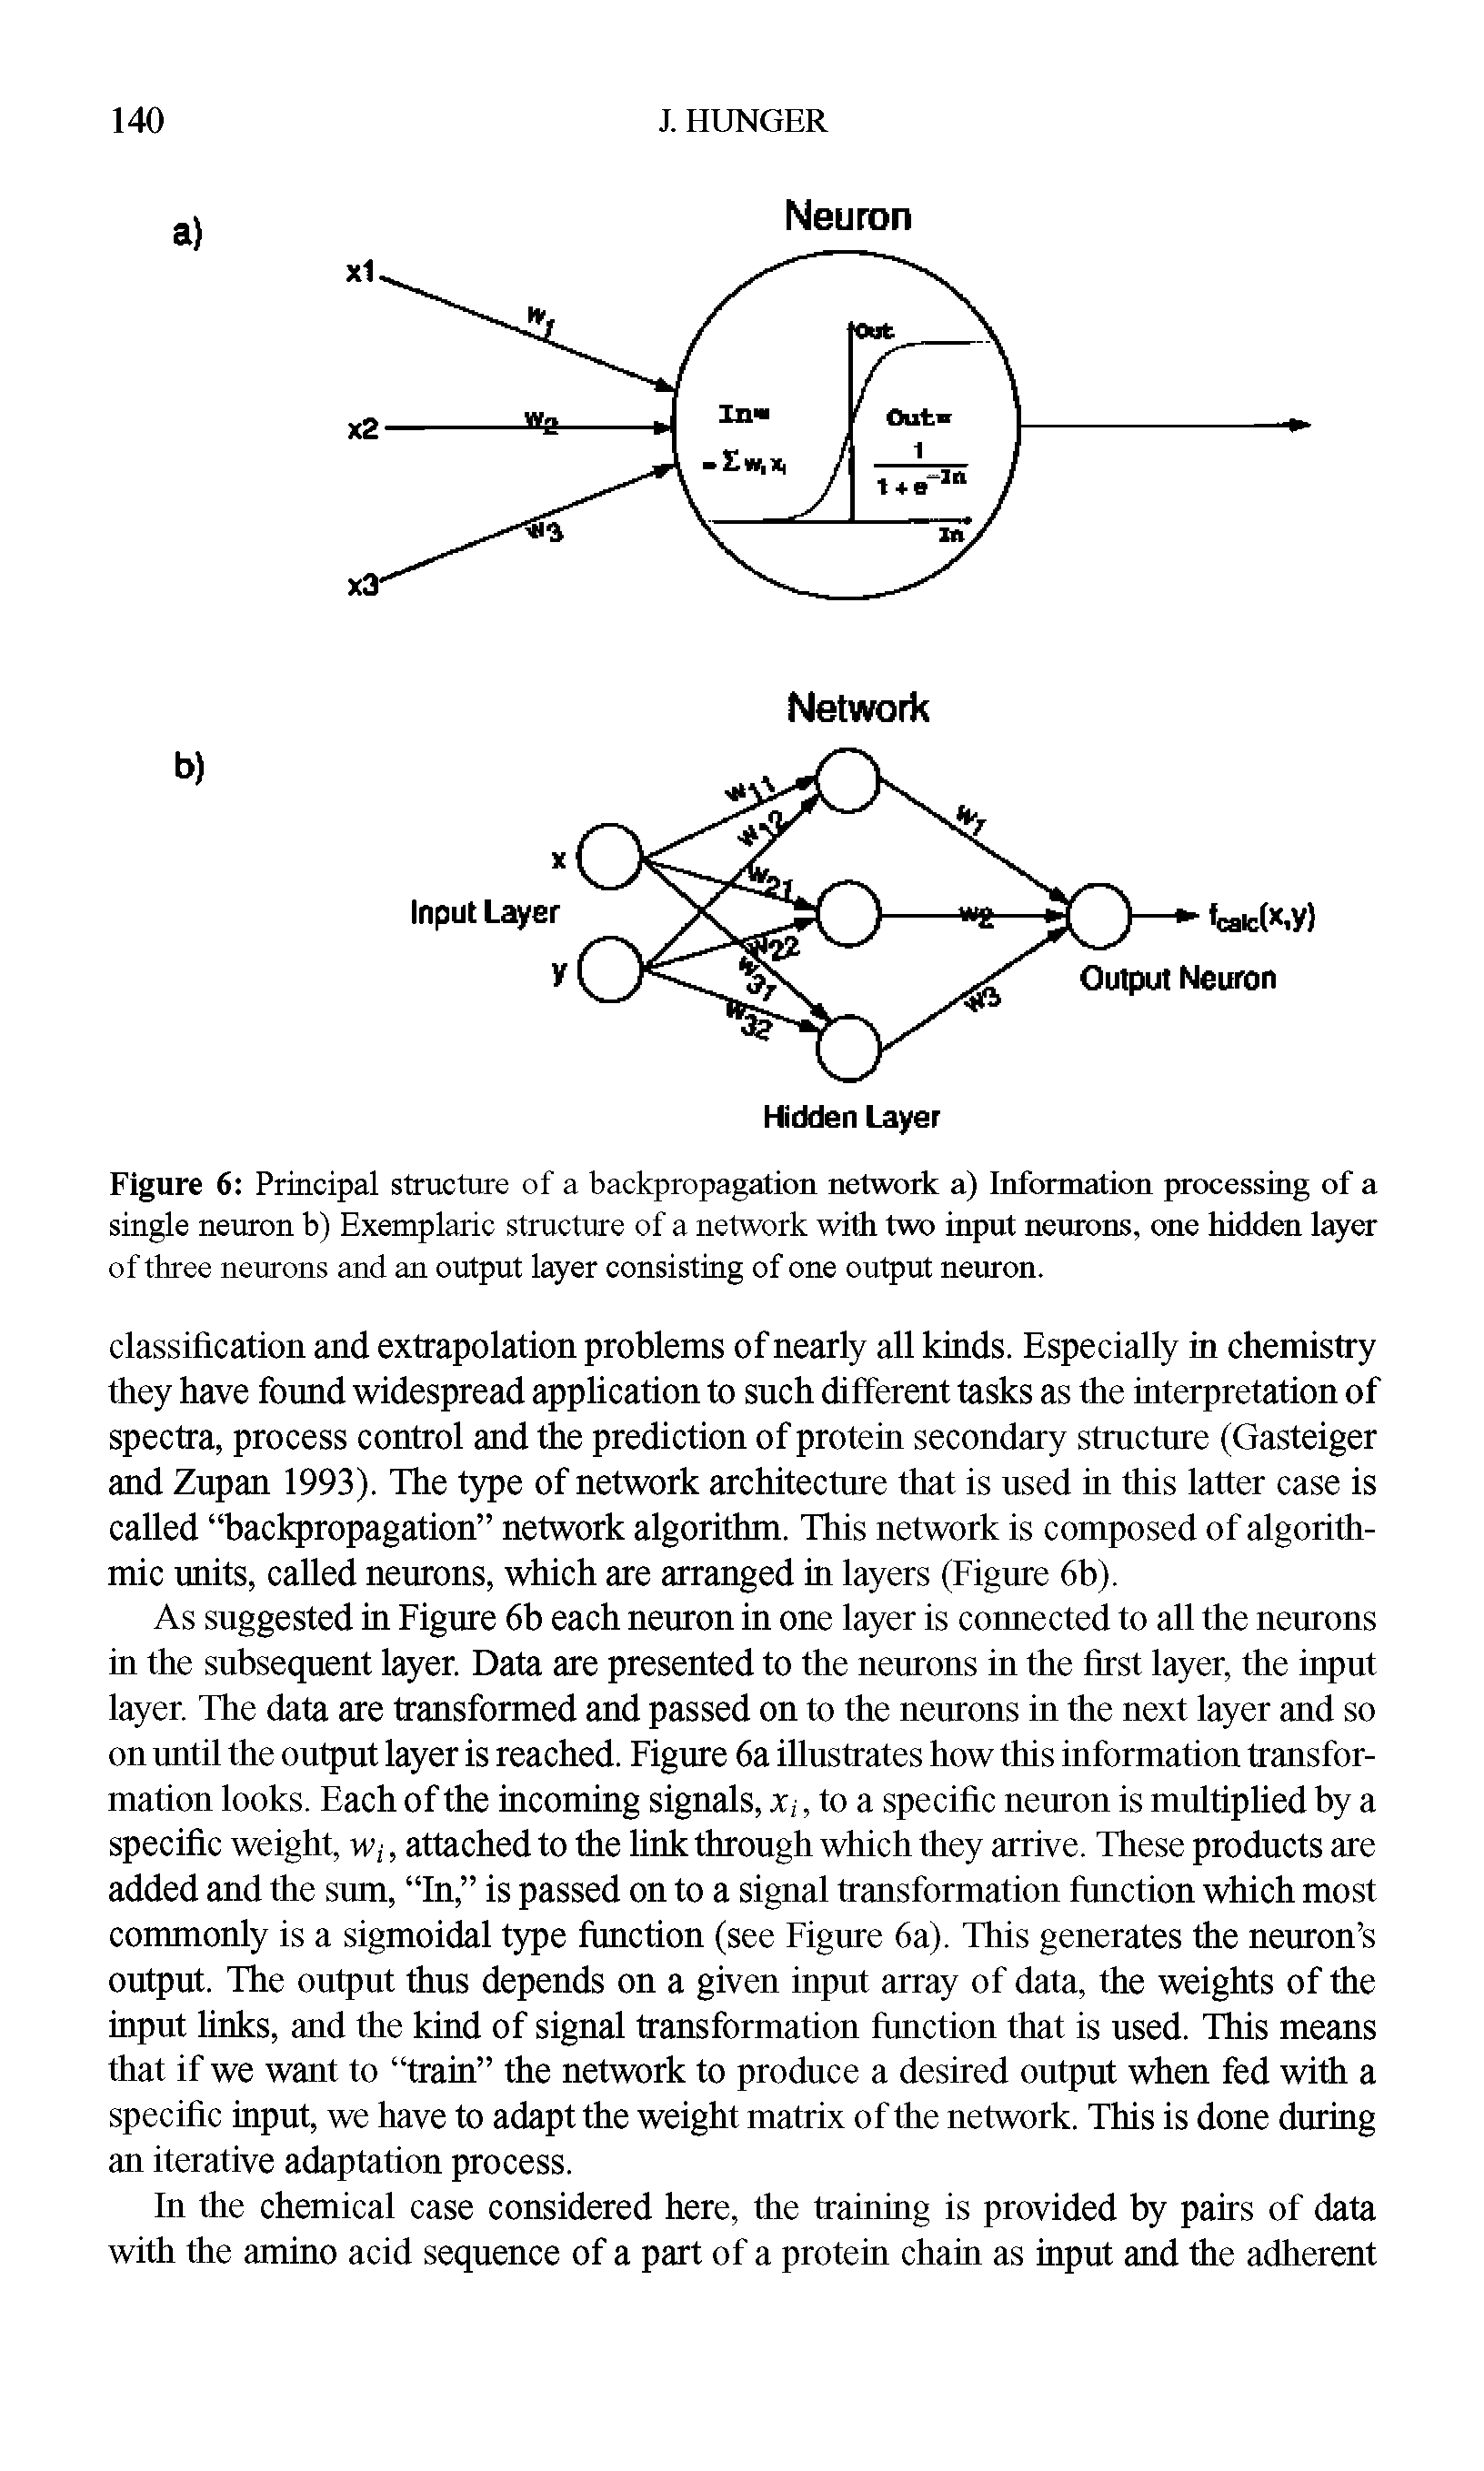 Figure 6 Principal structure of a backpropagation network a) Information processing of a single neuron b) Exemplaric structure of a network with two input neurons, one hidden layer of three neurons and an output layer consisting of one output neuron.